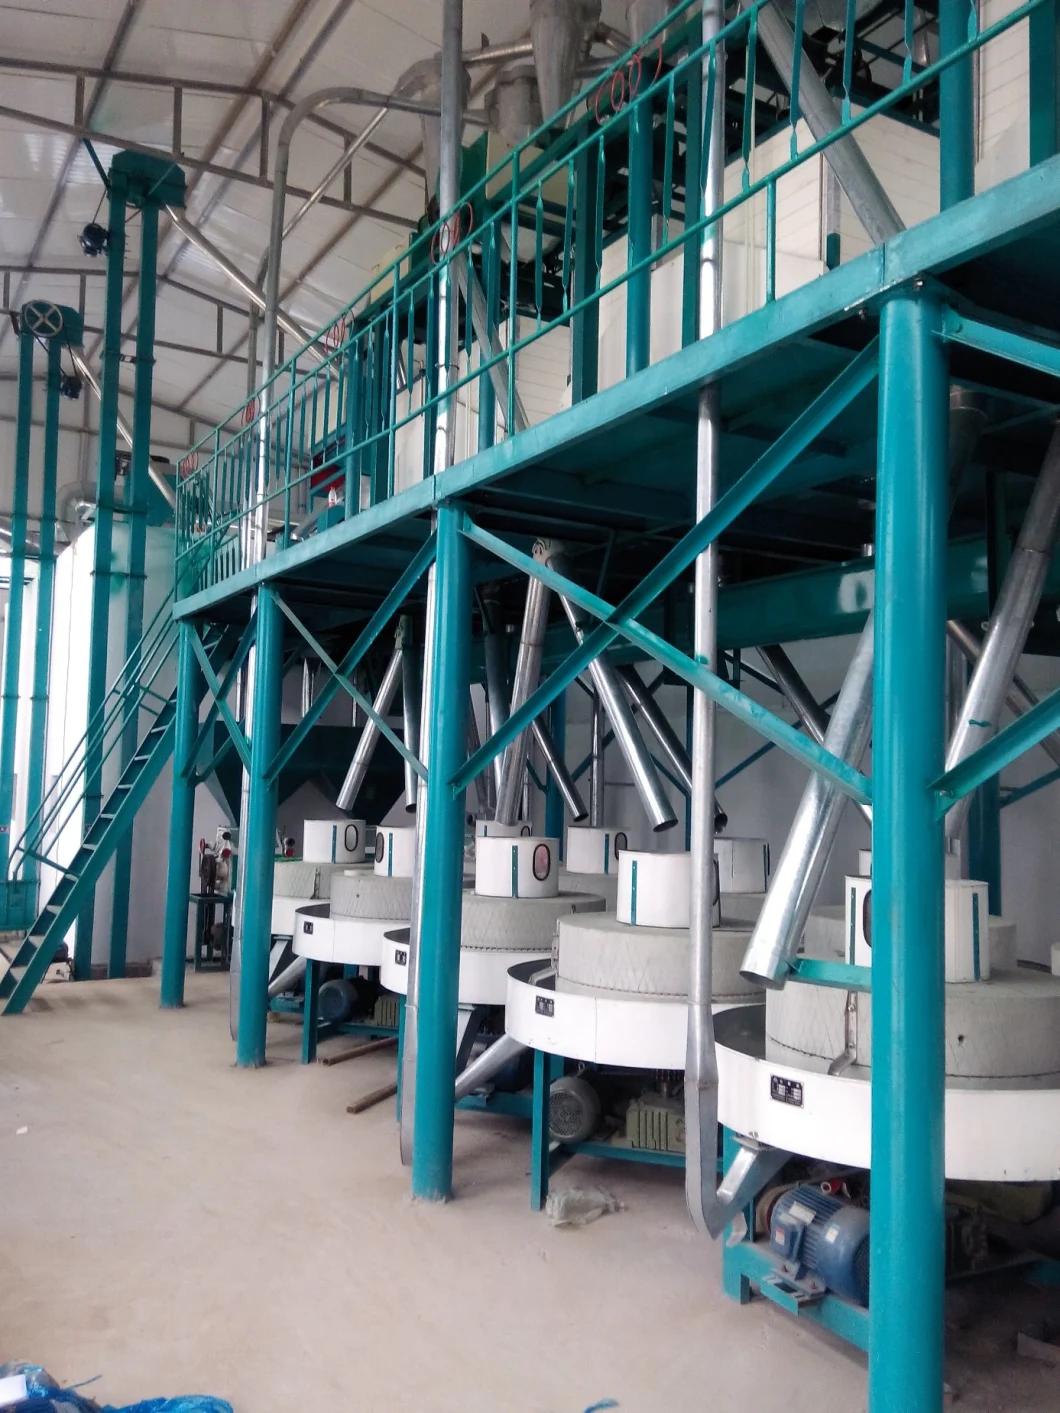 Big Capacity Commercial Automatic Wheat Flour Milling Machine